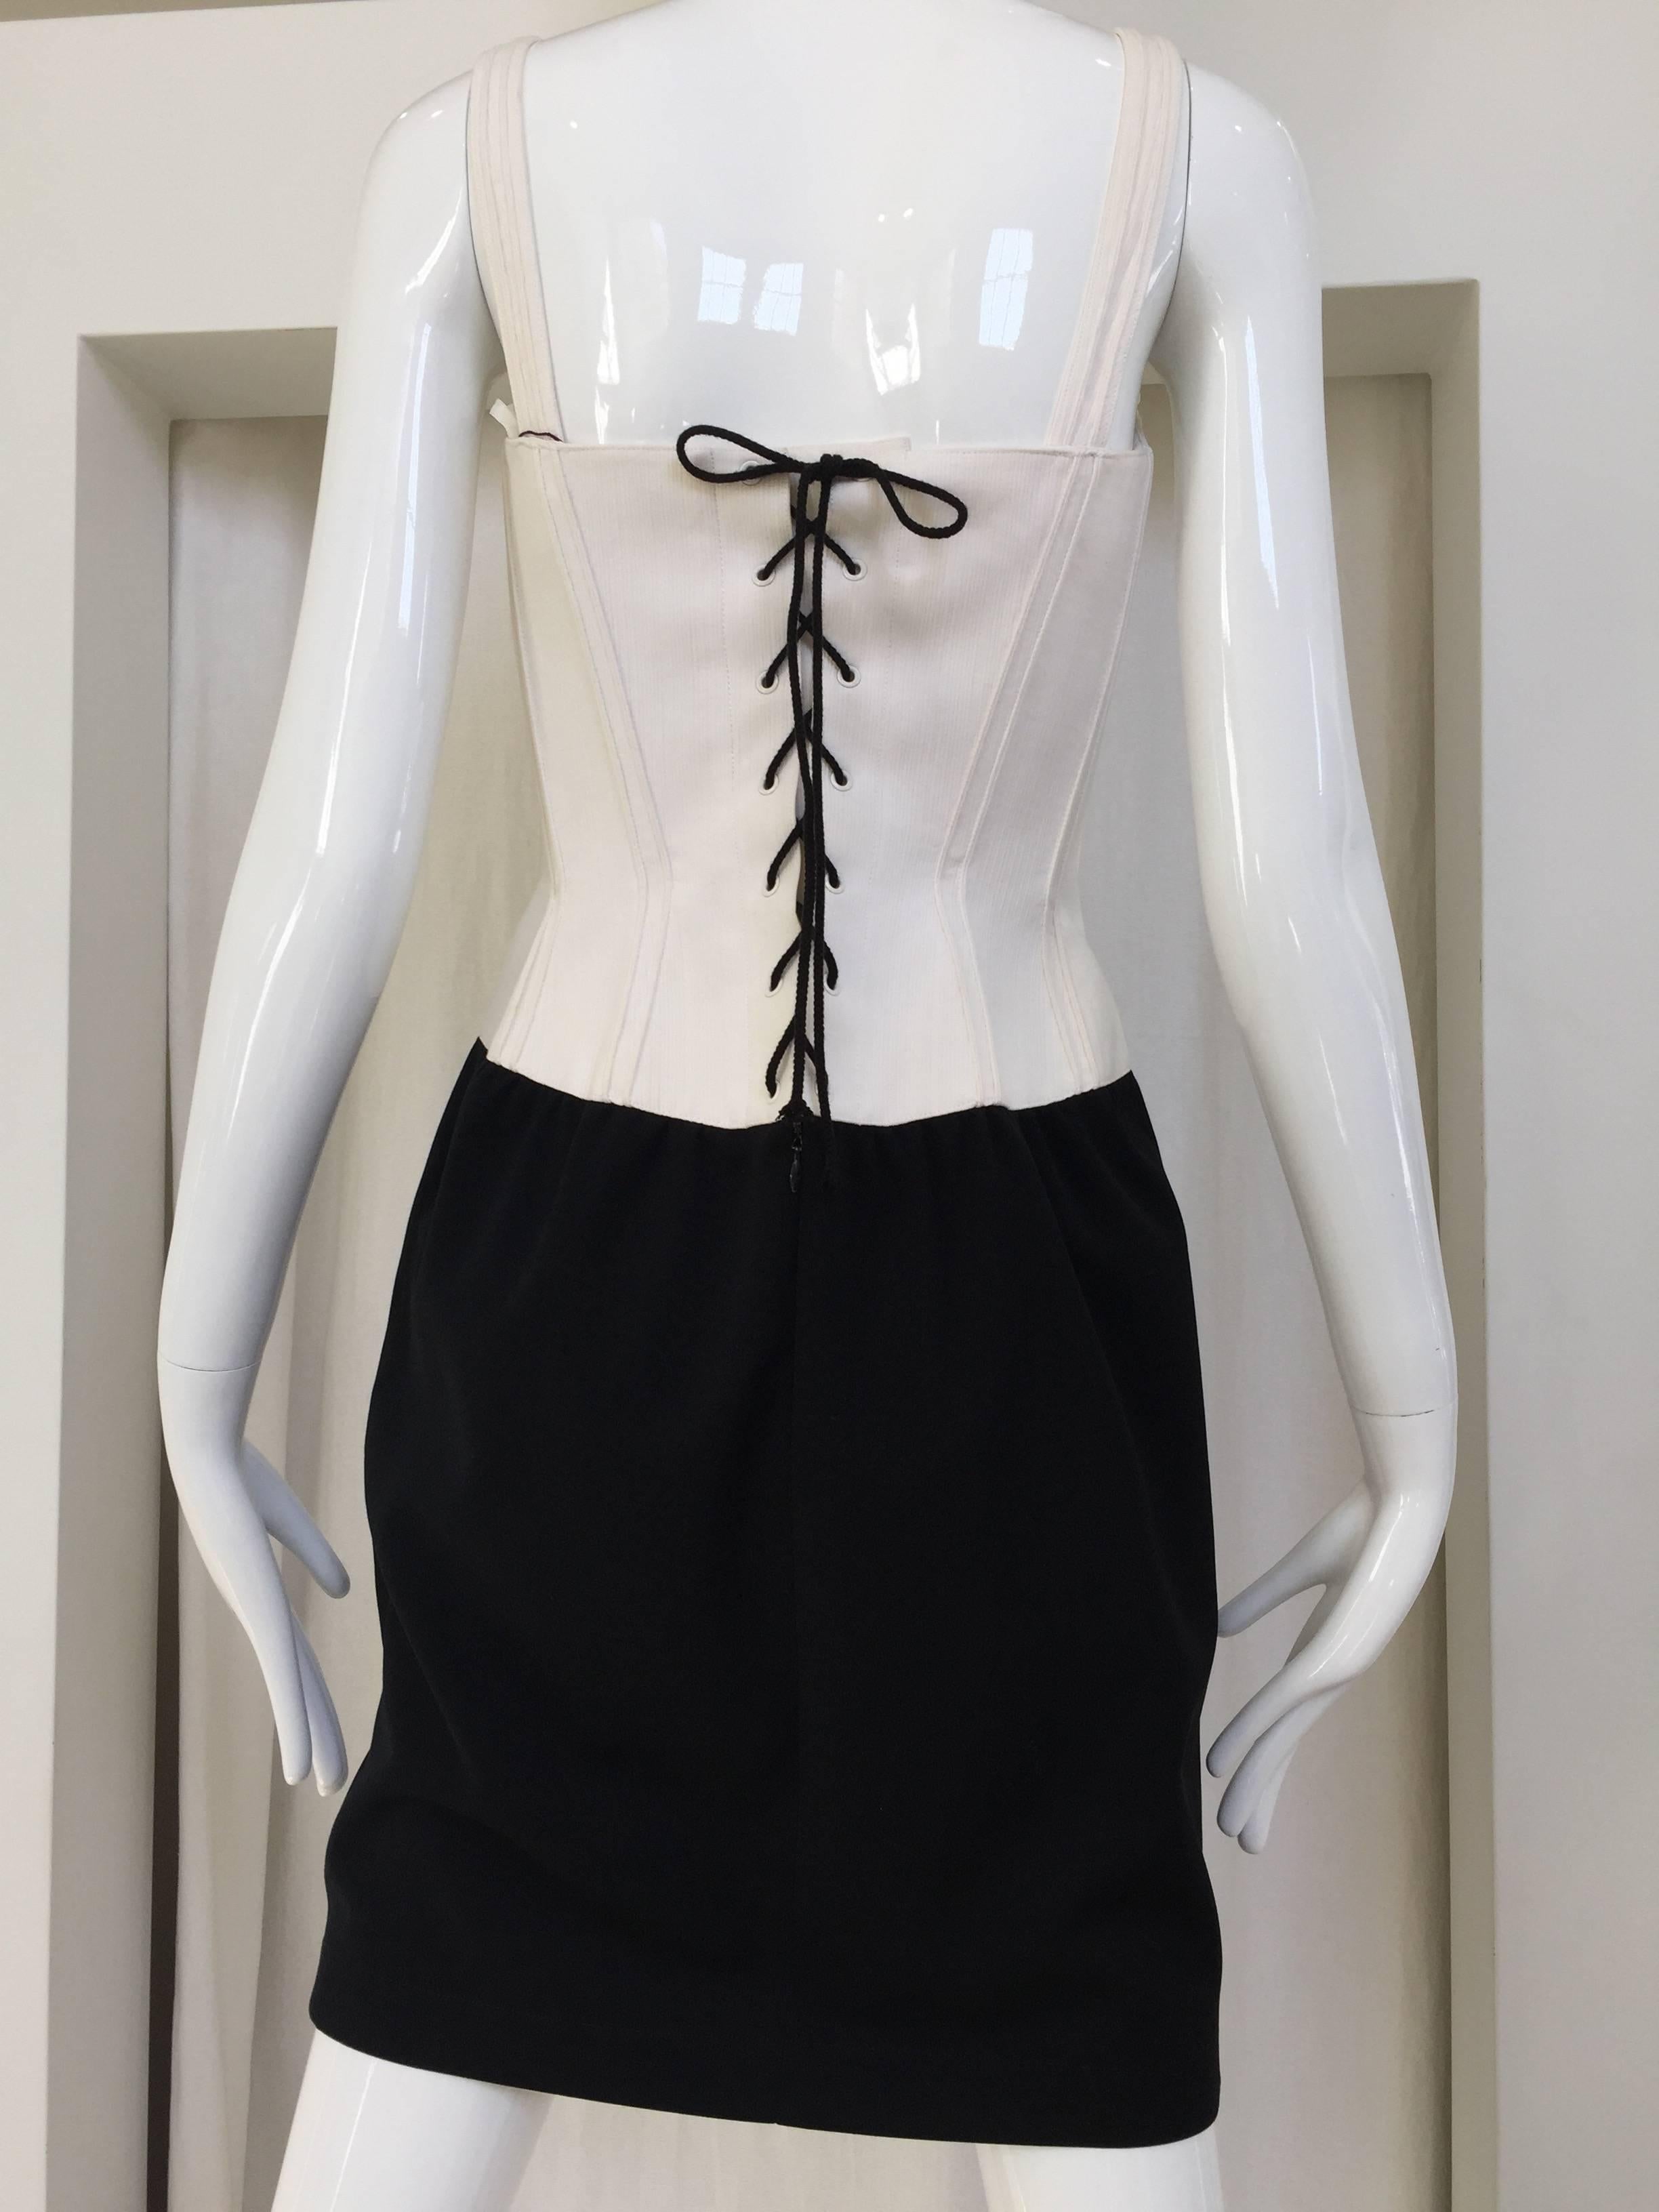 1990s Iconic THIERRY MUGLER Black and White Corset Vintage 90s Mini Dress. Sexy and Flattering bustier dress . Black lace up at the back that you can adjust. 2 front pockets. 4 - 6 Small - Medium
Bust fit: 34